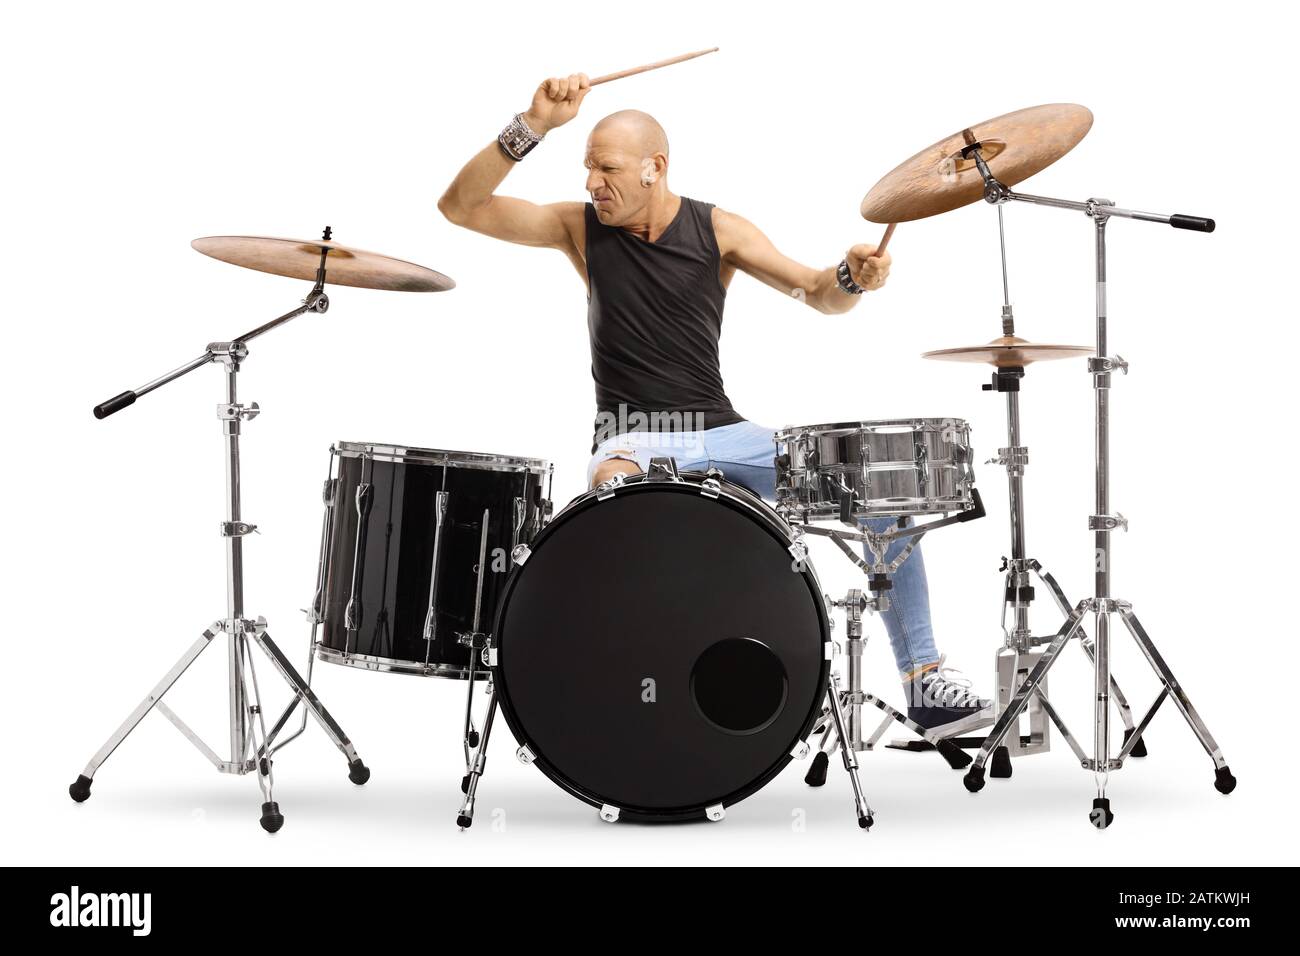 Bald man musician playing drums isolated on white background Stock Photo